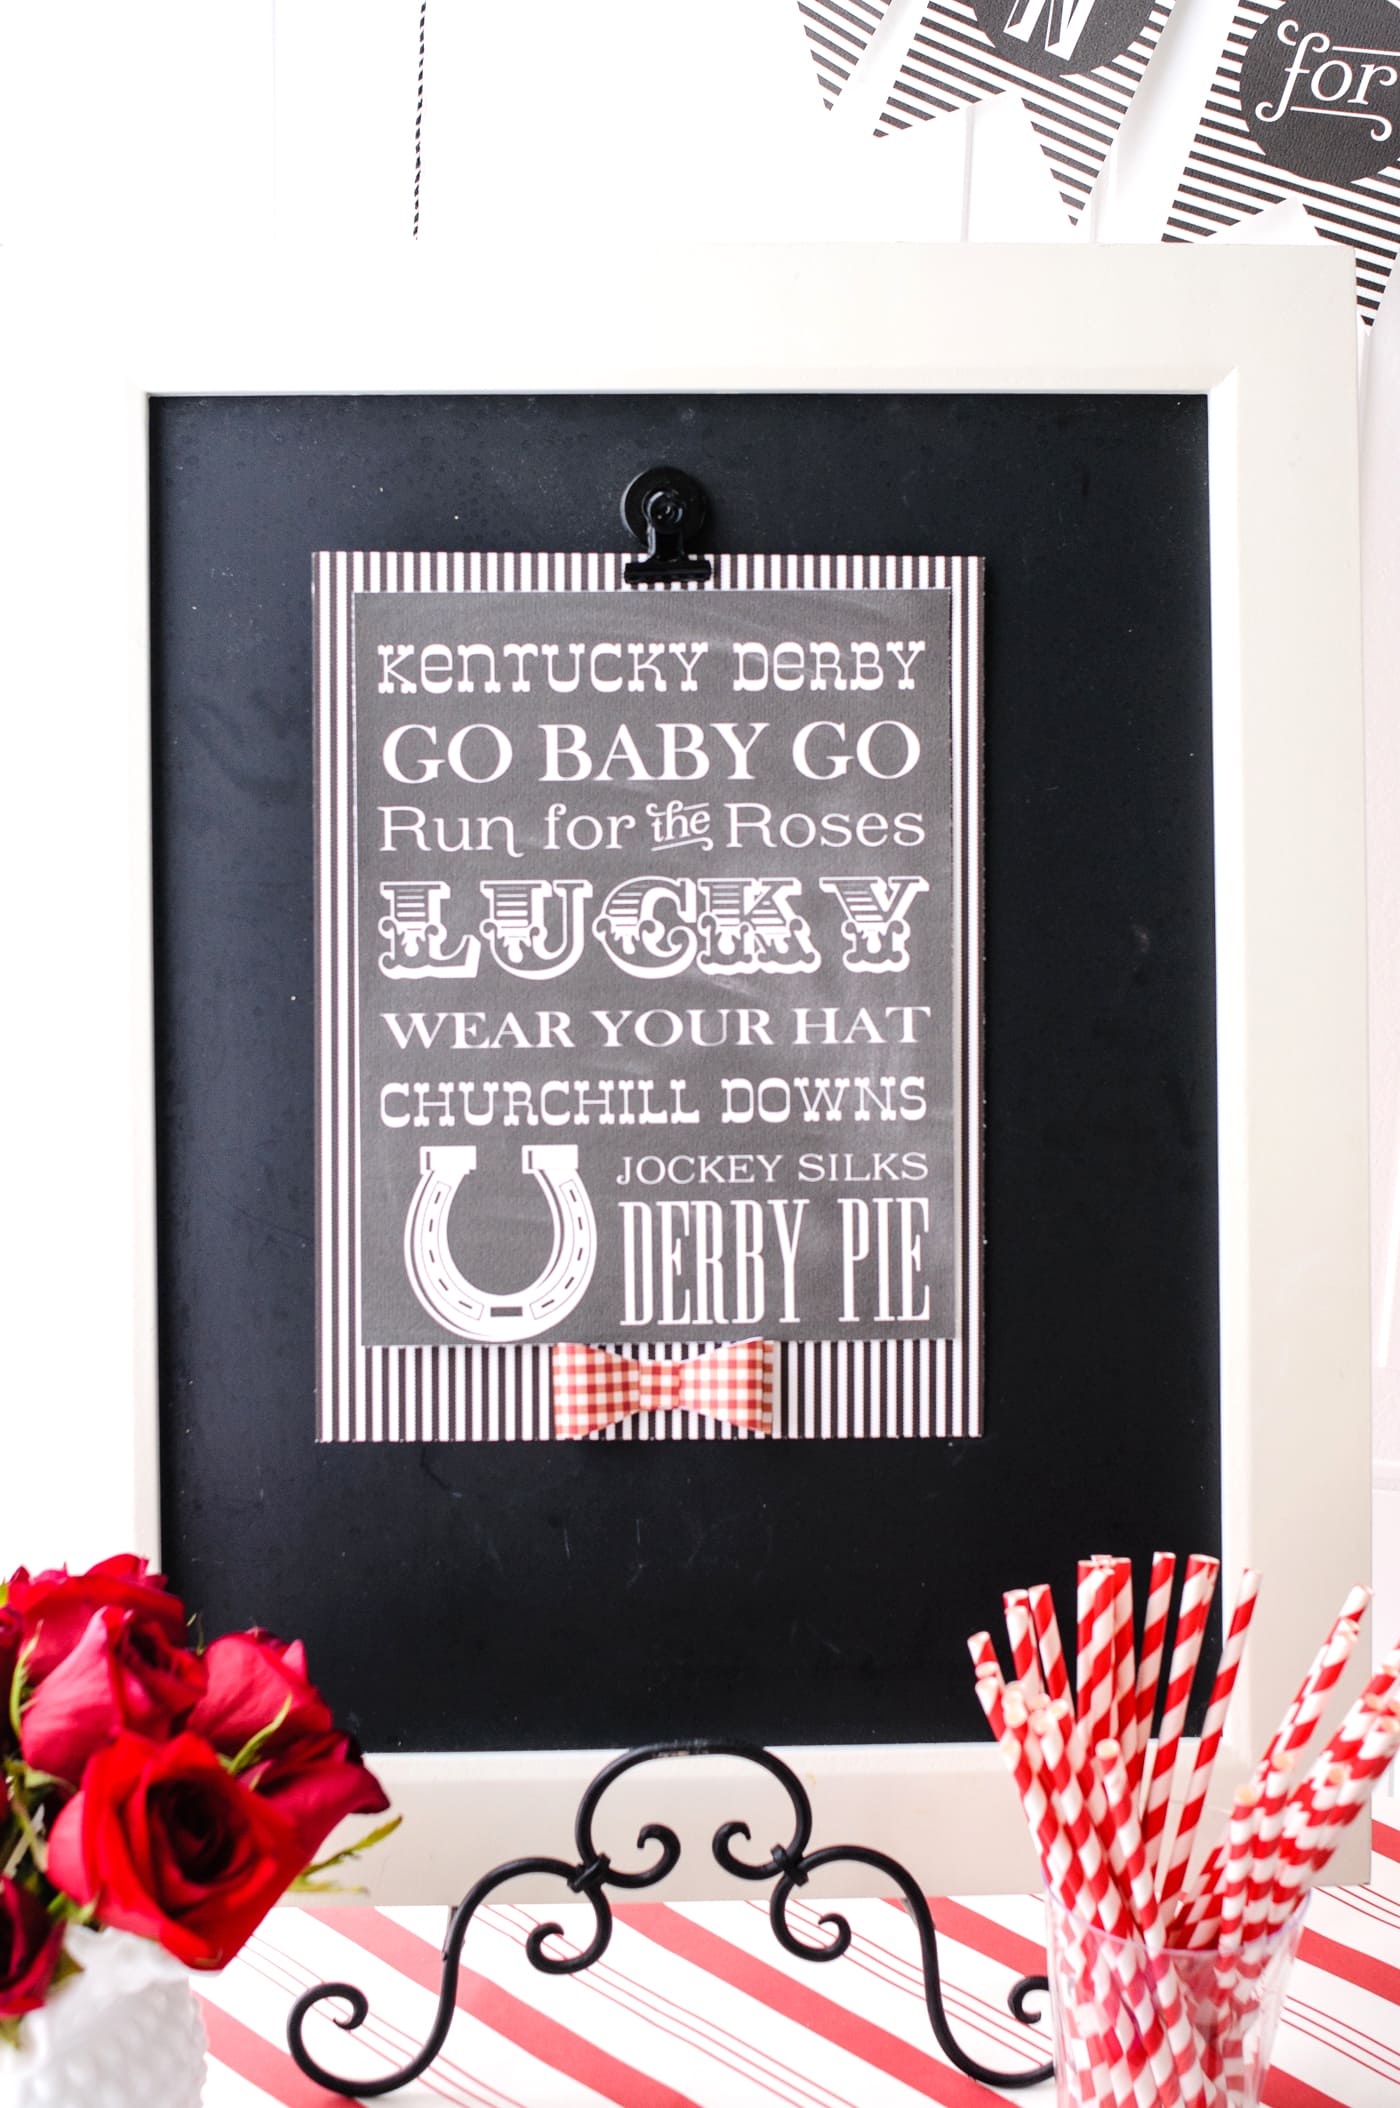 Free Printables Perfect for a Kentucky Derby Party